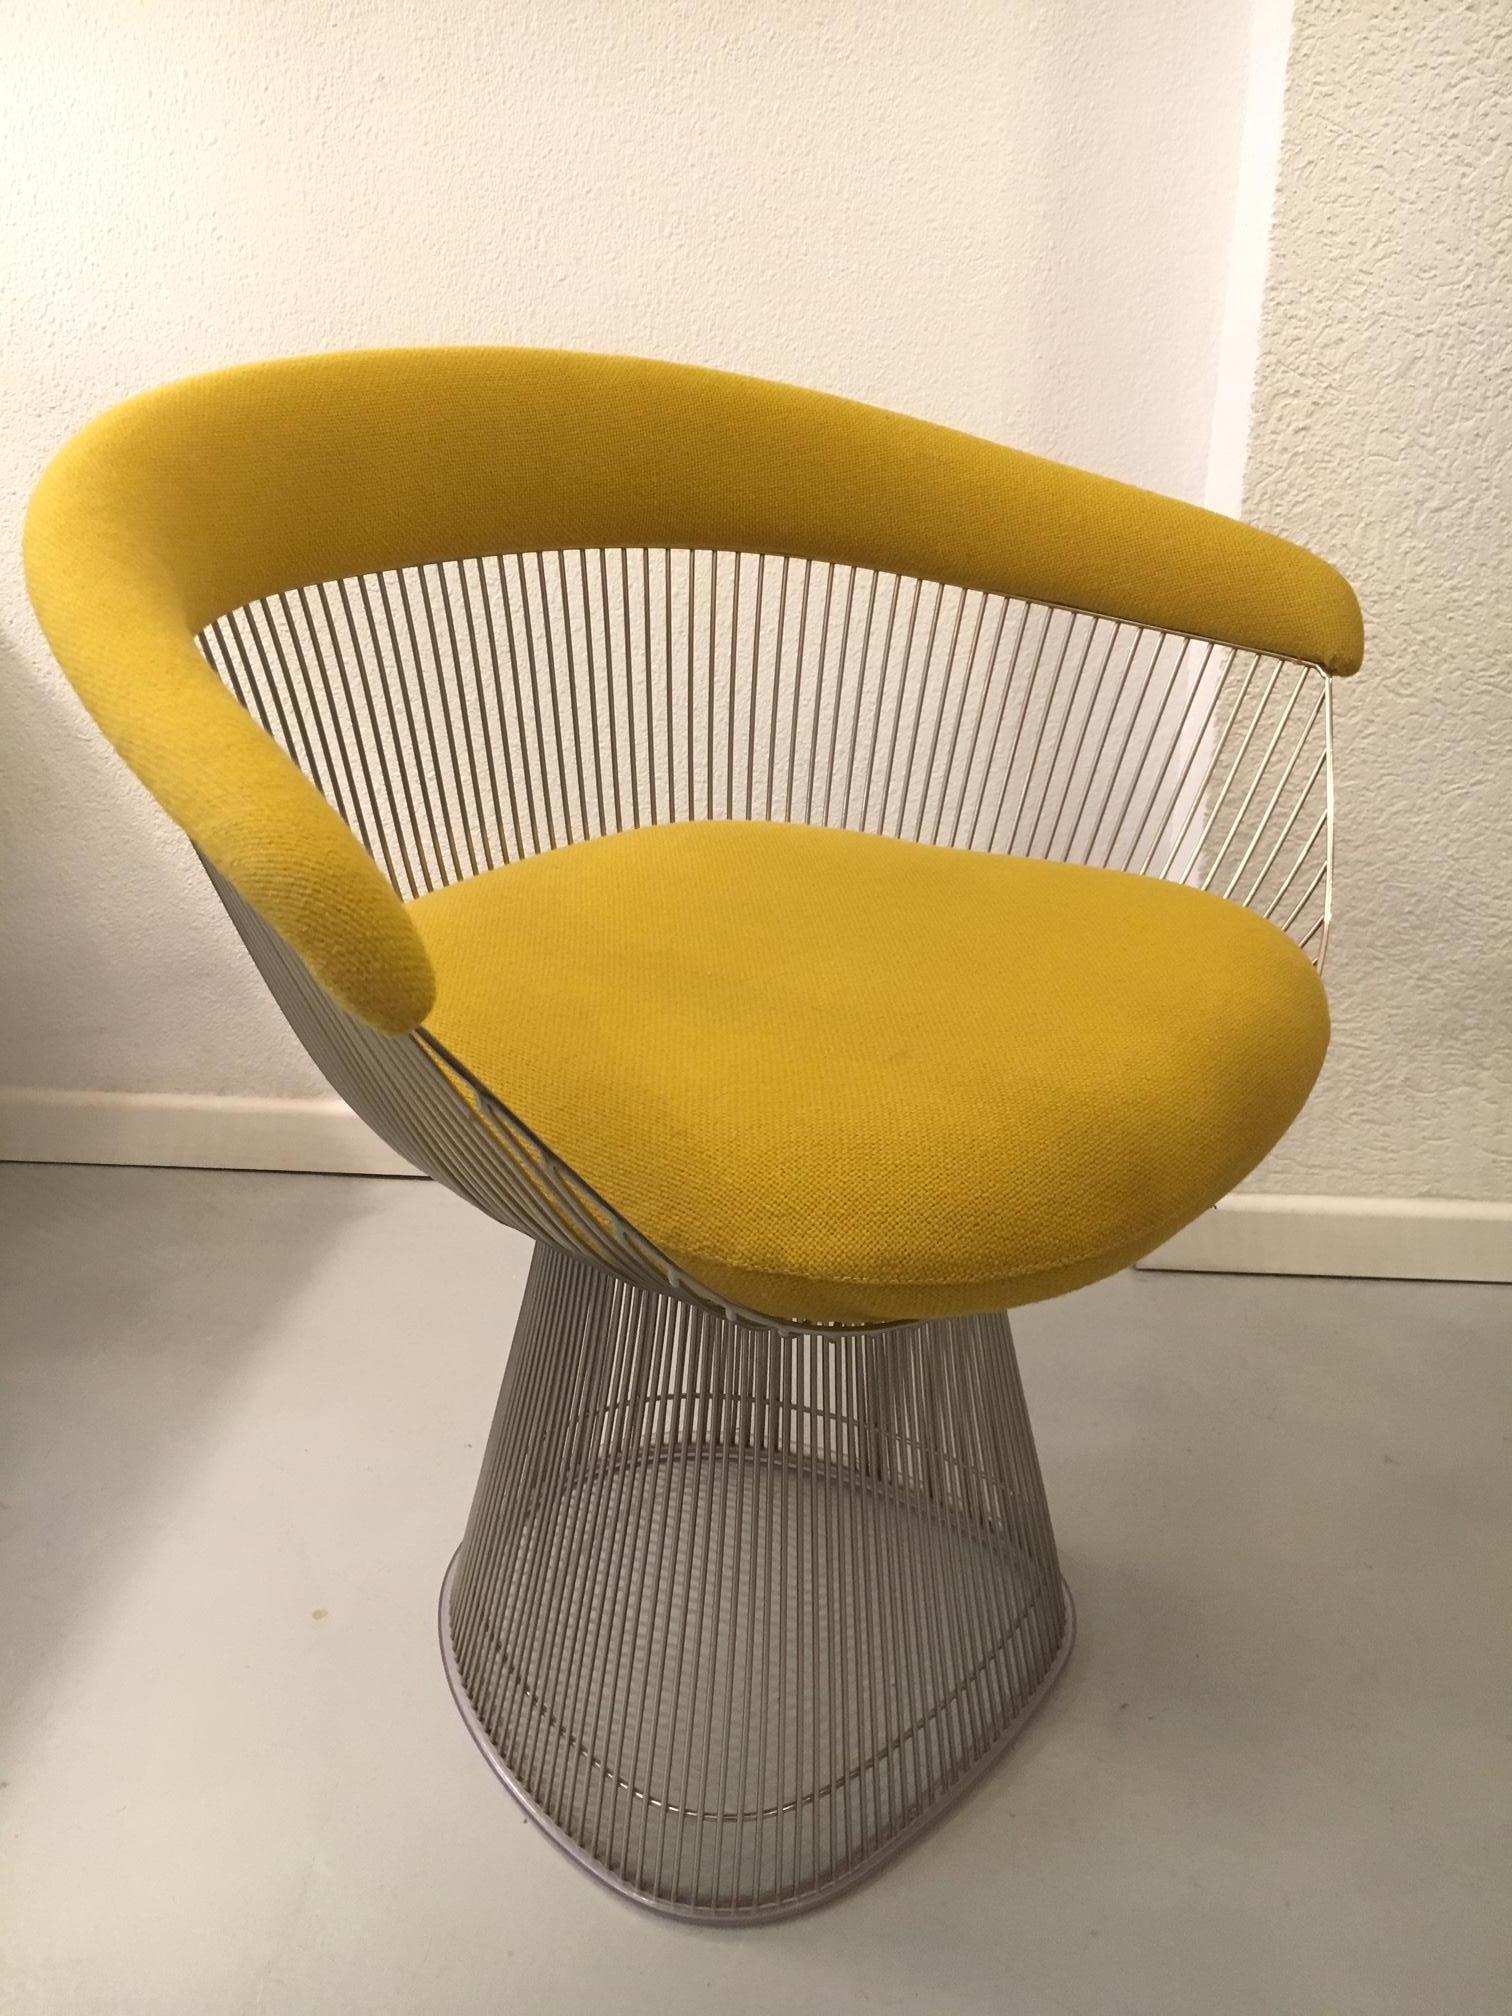 One chrome and yellow fabric chair by Warren Platner, produced by Knoll, circa, 1970s.
In 1966, the Platner Collection captured the “decorative, gentle, graceful” shapes that were beginning to infiltrate the modern vocabulary. 
The Arm Chair, which